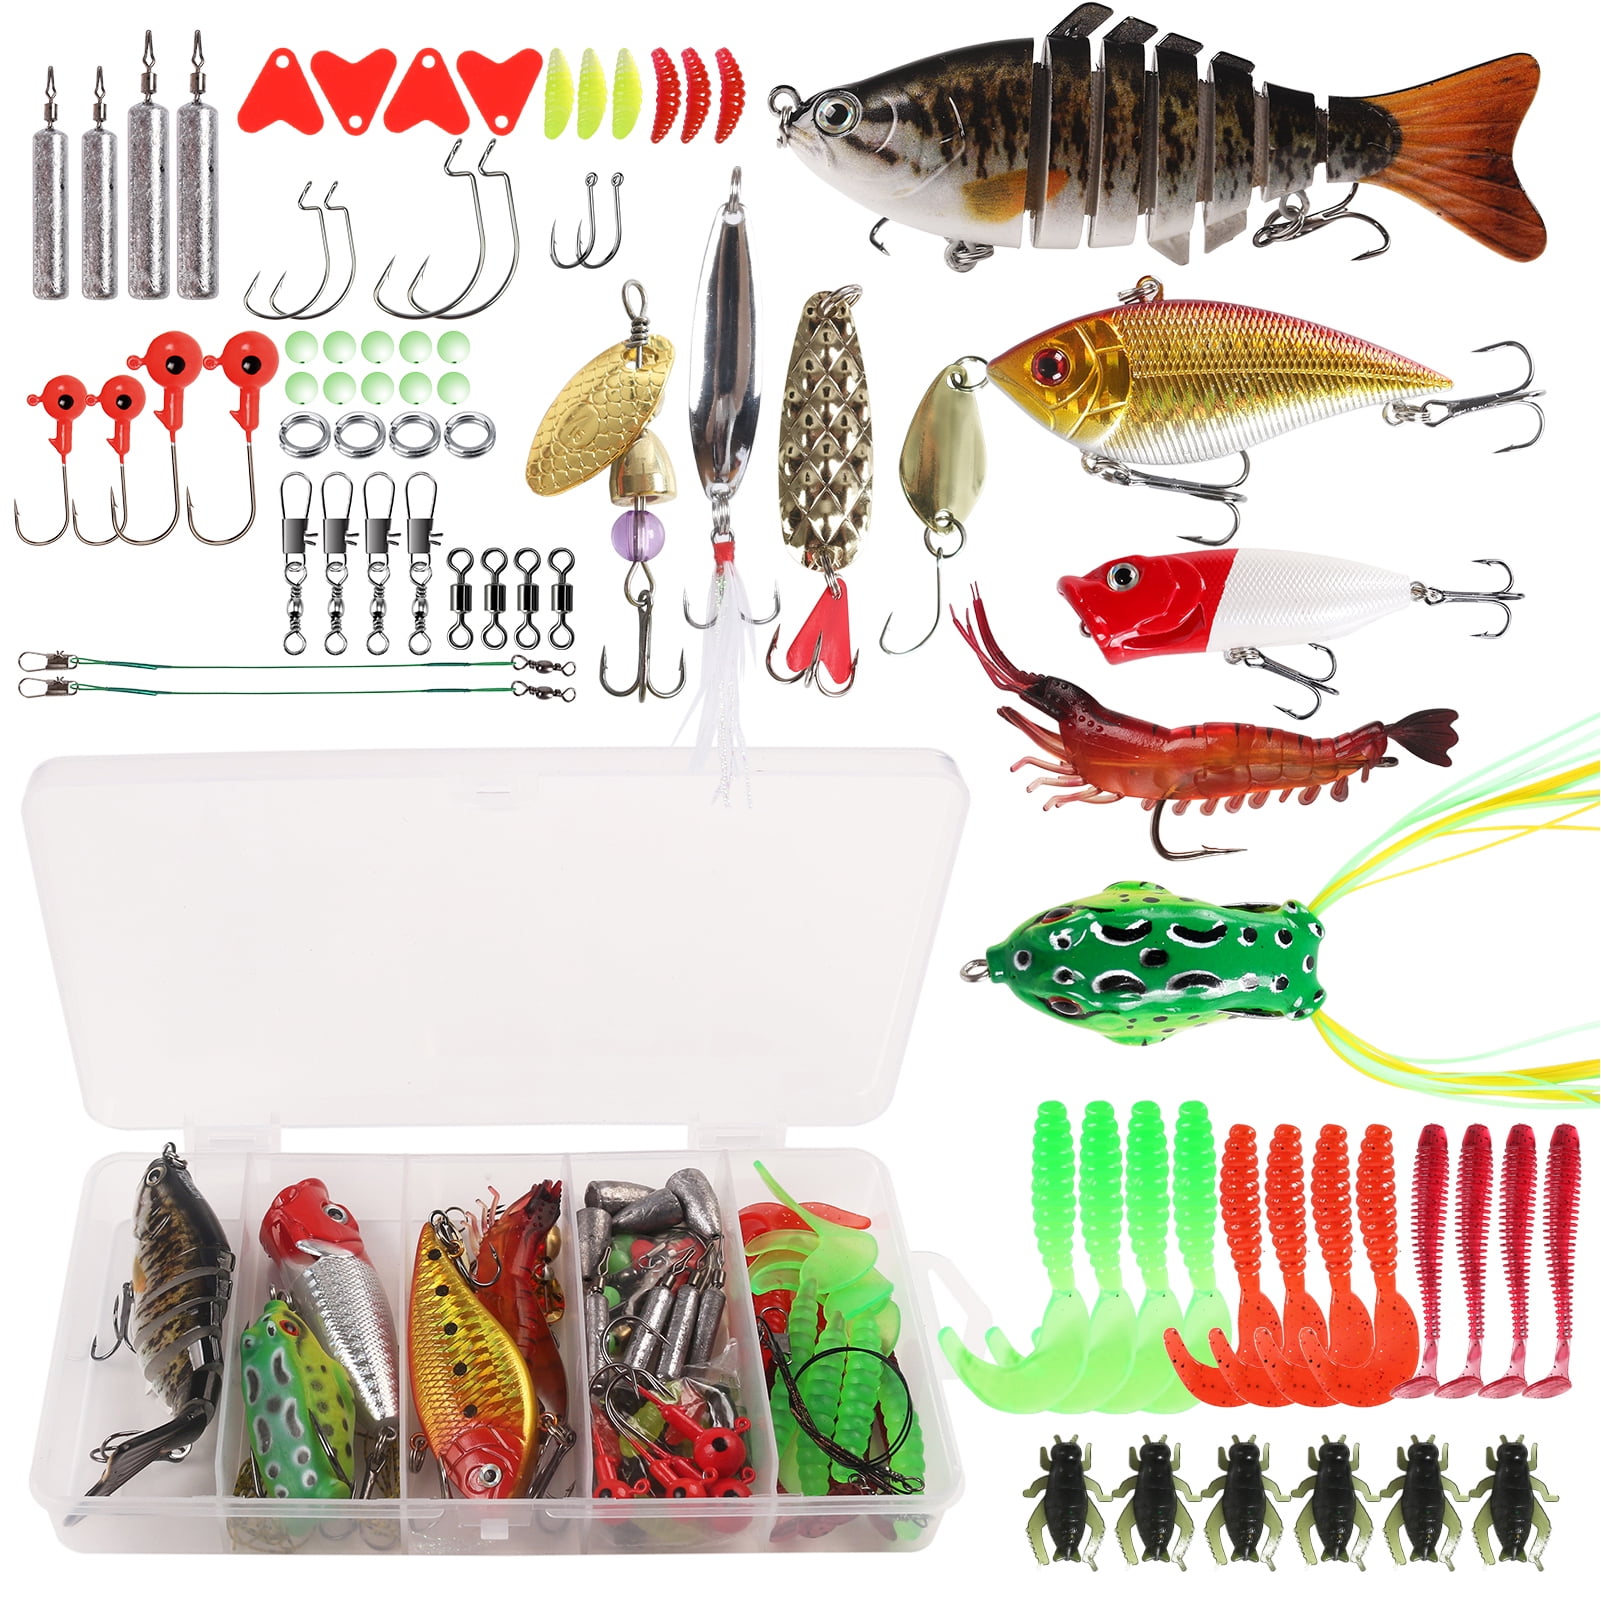 OWSOO Fishing Accessories Tackle Tool 83pcs Lures Kit for Bass Trout  Salmon, Enhance Your Fishing Experience